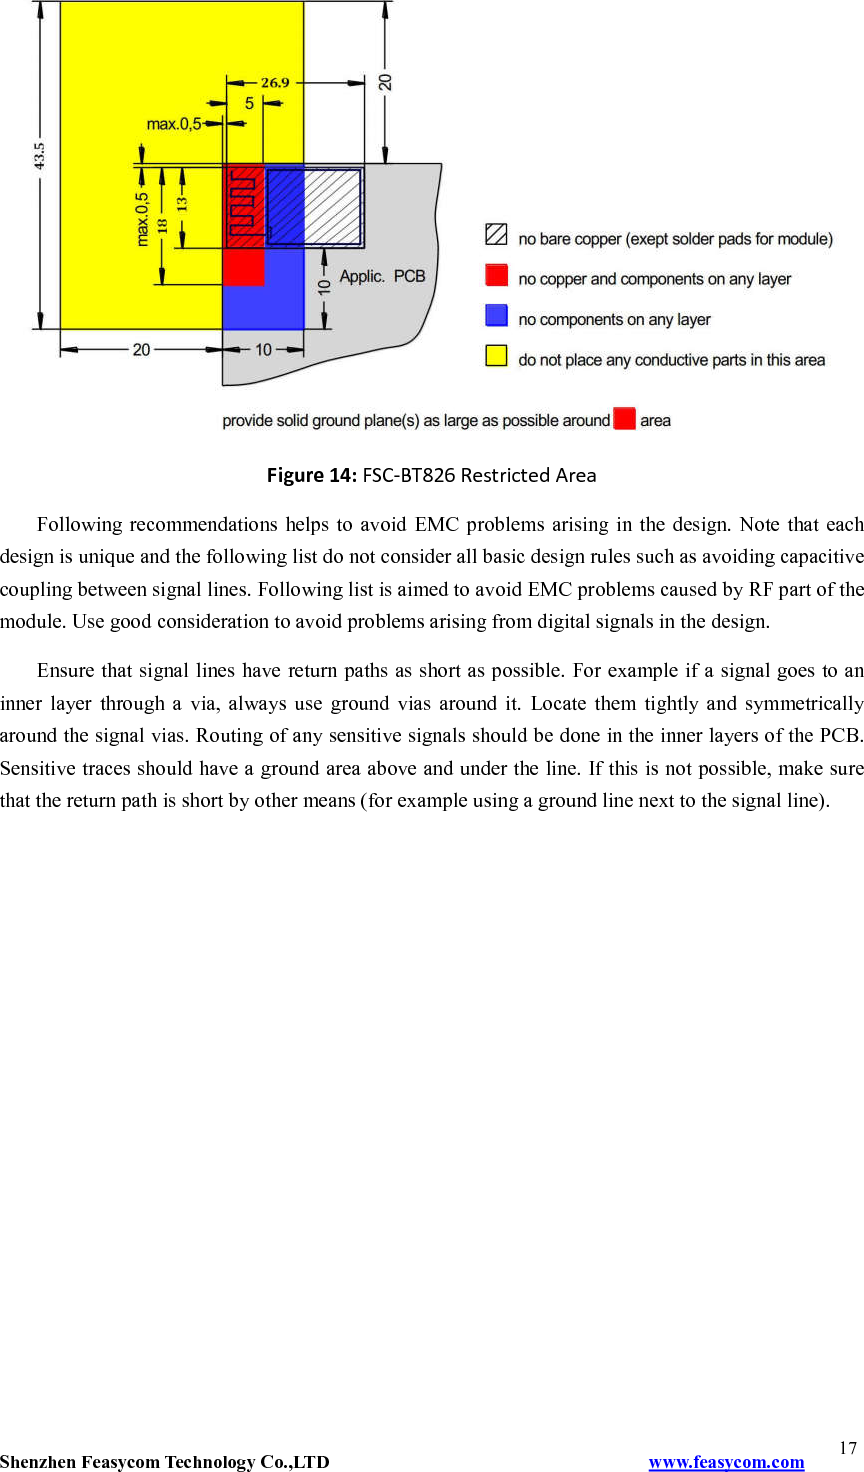 Shenzhen Feasycom Technology Co.,LTD                                           www.feasycom.com     17   Figure 14: FSC-BT826 Restricted Area Following  recommendations  helps  to  avoid  EMC problems arising in the design.  Note  that  each design is unique and the following list do not consider all basic design rules such as avoiding capacitive coupling between signal lines. Following list is aimed to avoid EMC problems caused by RF part of the module. Use good consideration to avoid problems arising from digital signals in the design. Ensure that signal lines have return paths as short as possible. For example if a signal goes to an inner  layer  through  a  via,  always  use  ground  vias  around  it.  Locate  them  tightly  and  symmetrically around the signal vias. Routing of any sensitive signals should be done in the inner layers of the PCB. Sensitive traces should have a ground area above and under the line. If this is not possible, make sure that the return path is short by other means (for example using a ground line next to the signal line).             